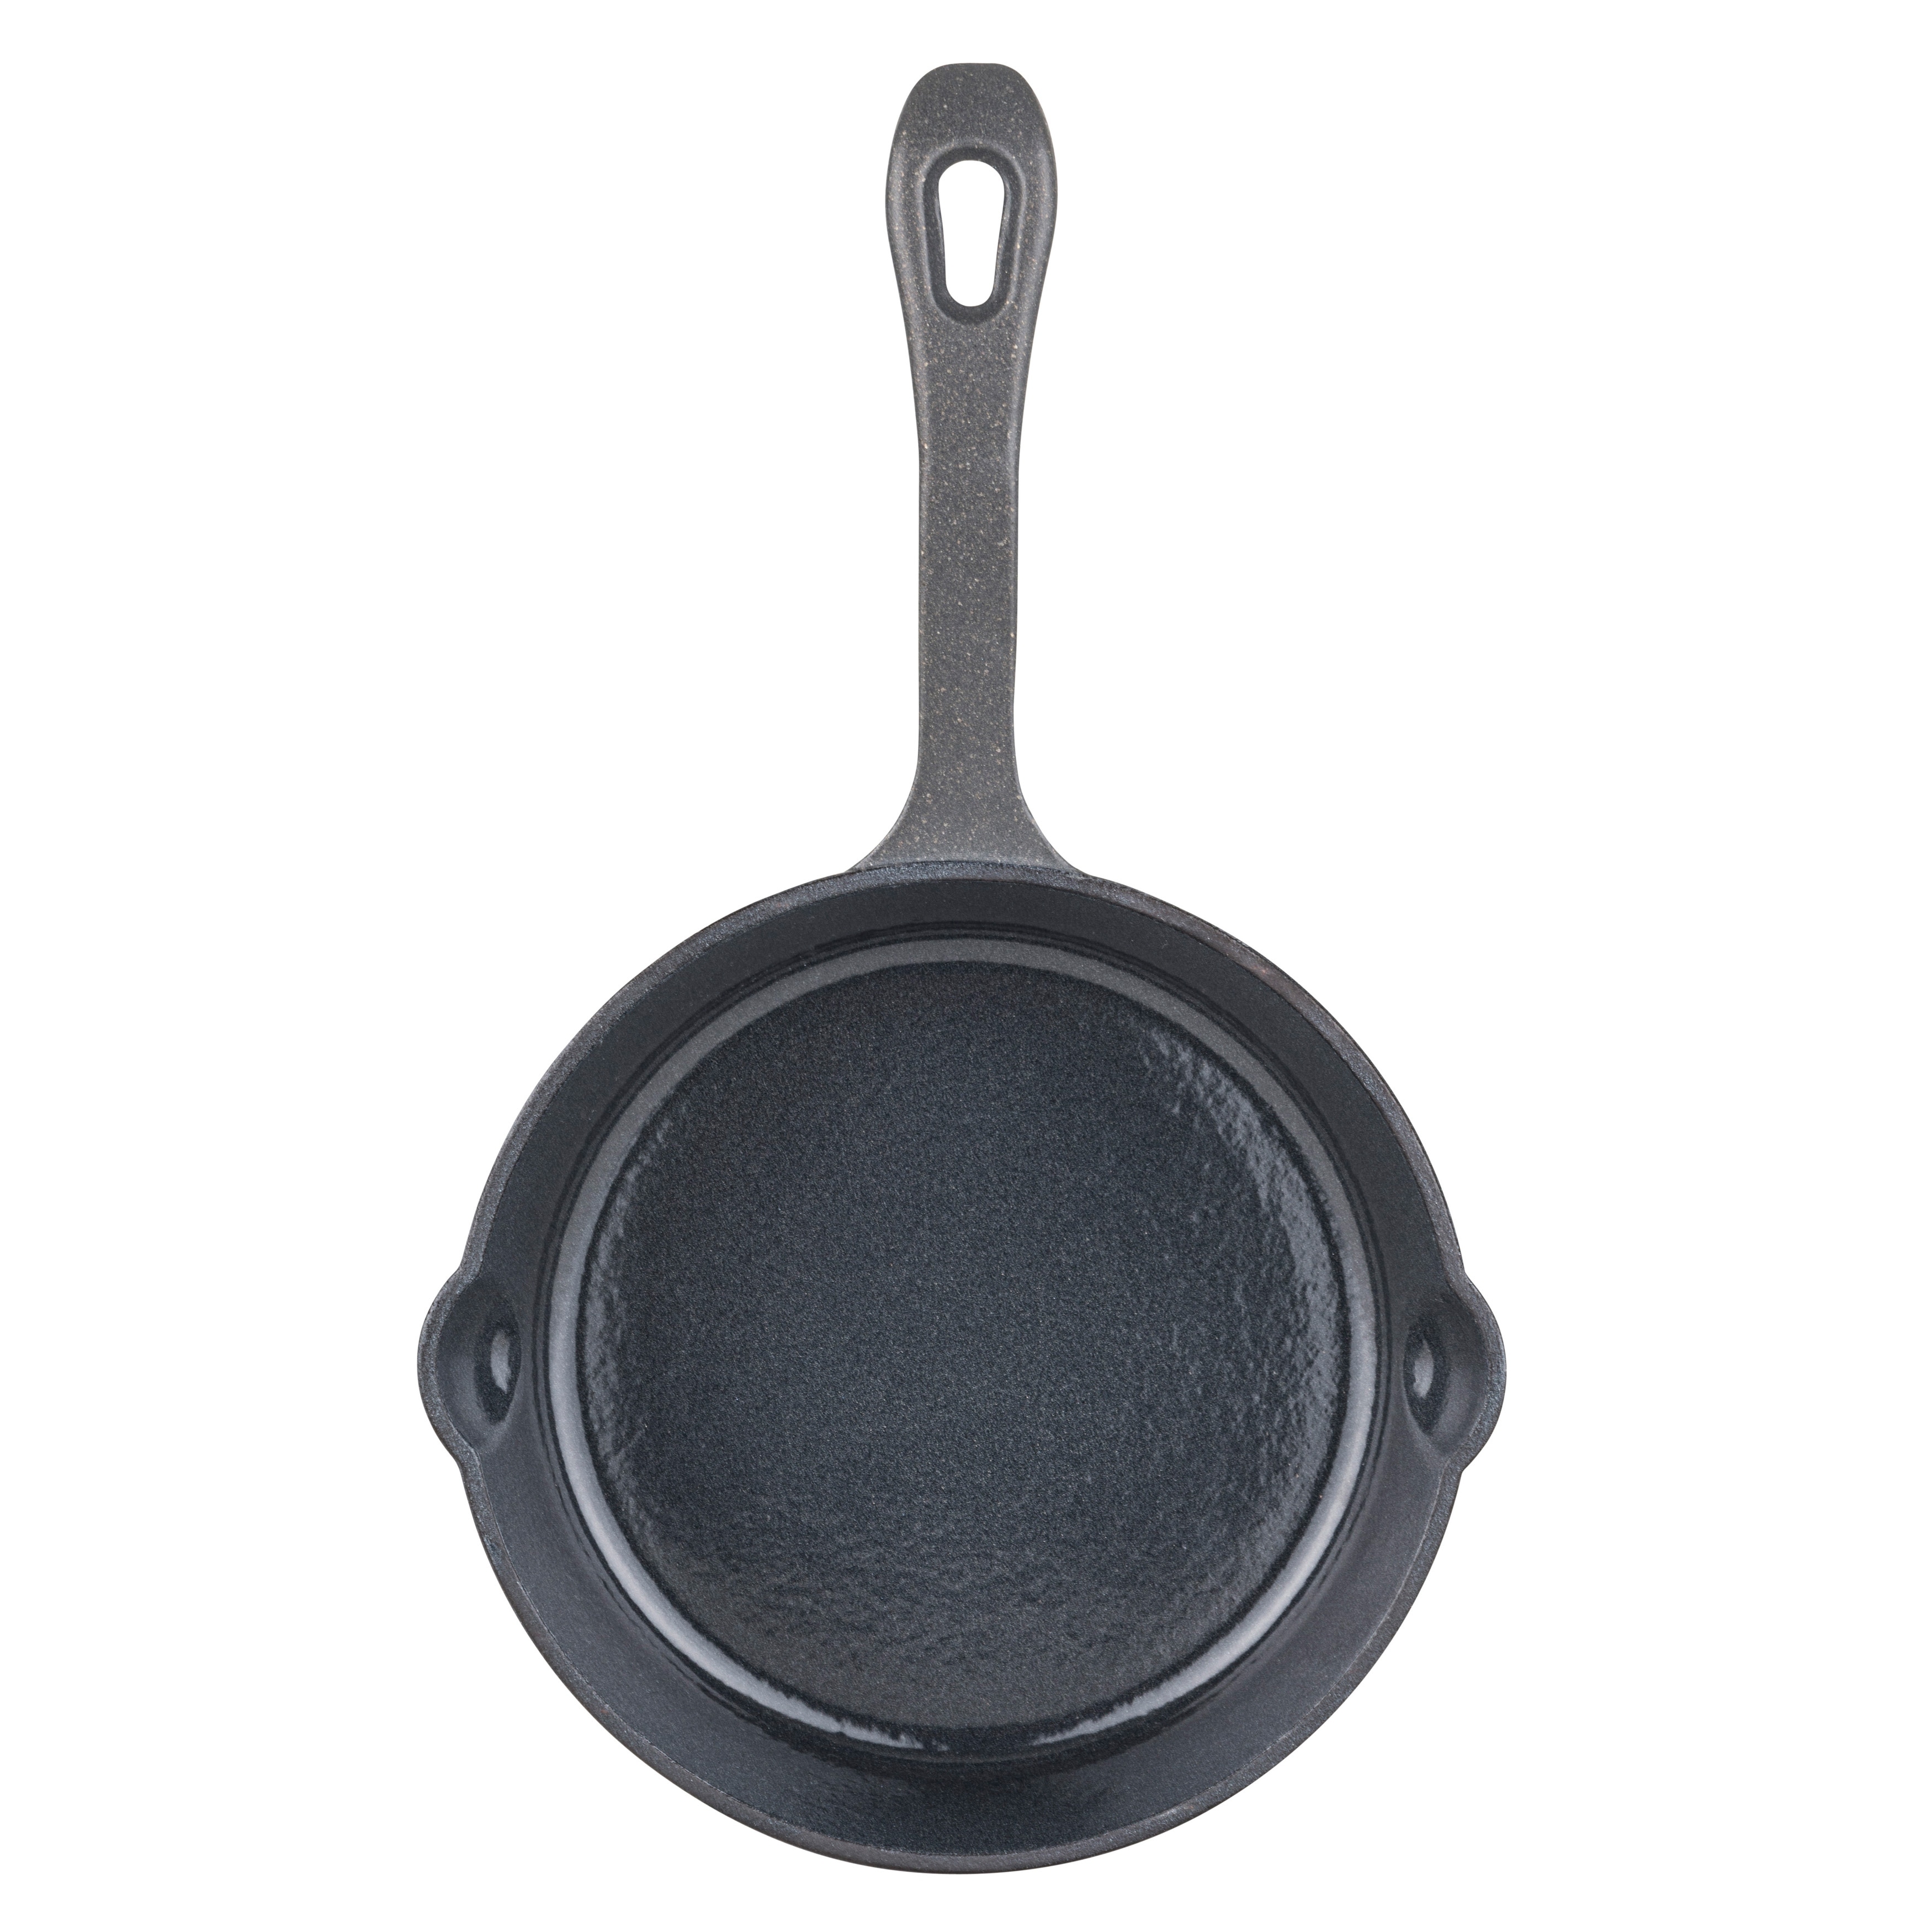 https://ak1.ostkcdn.com/images/products/is/images/direct/5a5518d9a76526c67d3ffe78823adcfe4e885e8e/Viking-Cast-Iron-8-inch-Fry-Pan%2C-Charcoal.jpg